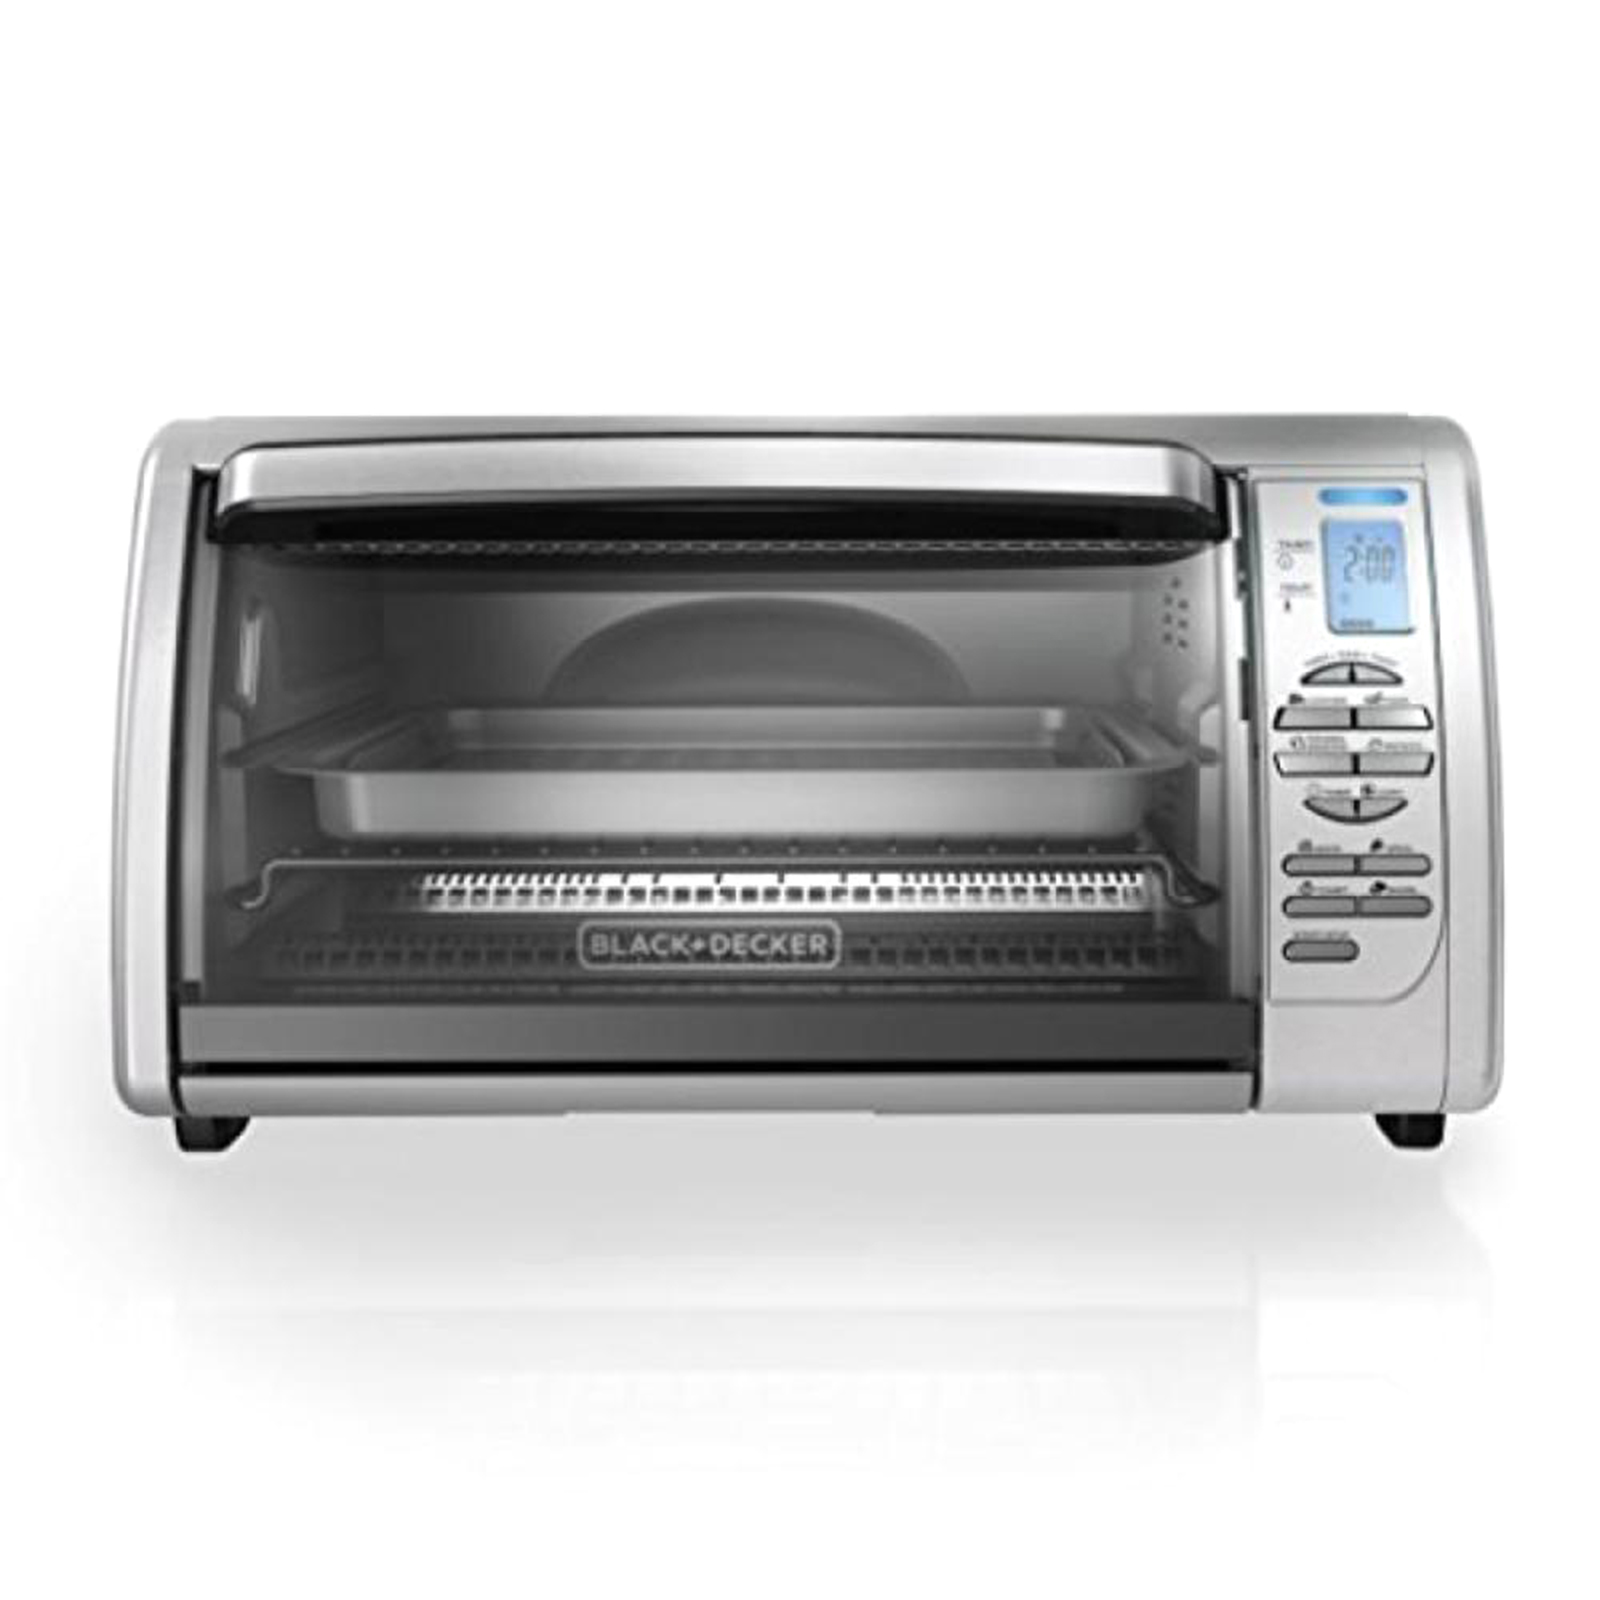 BLACK+DECKER CTO6335S  Digital Convection Countertop Toaster Oven with Broil Rack - Silver